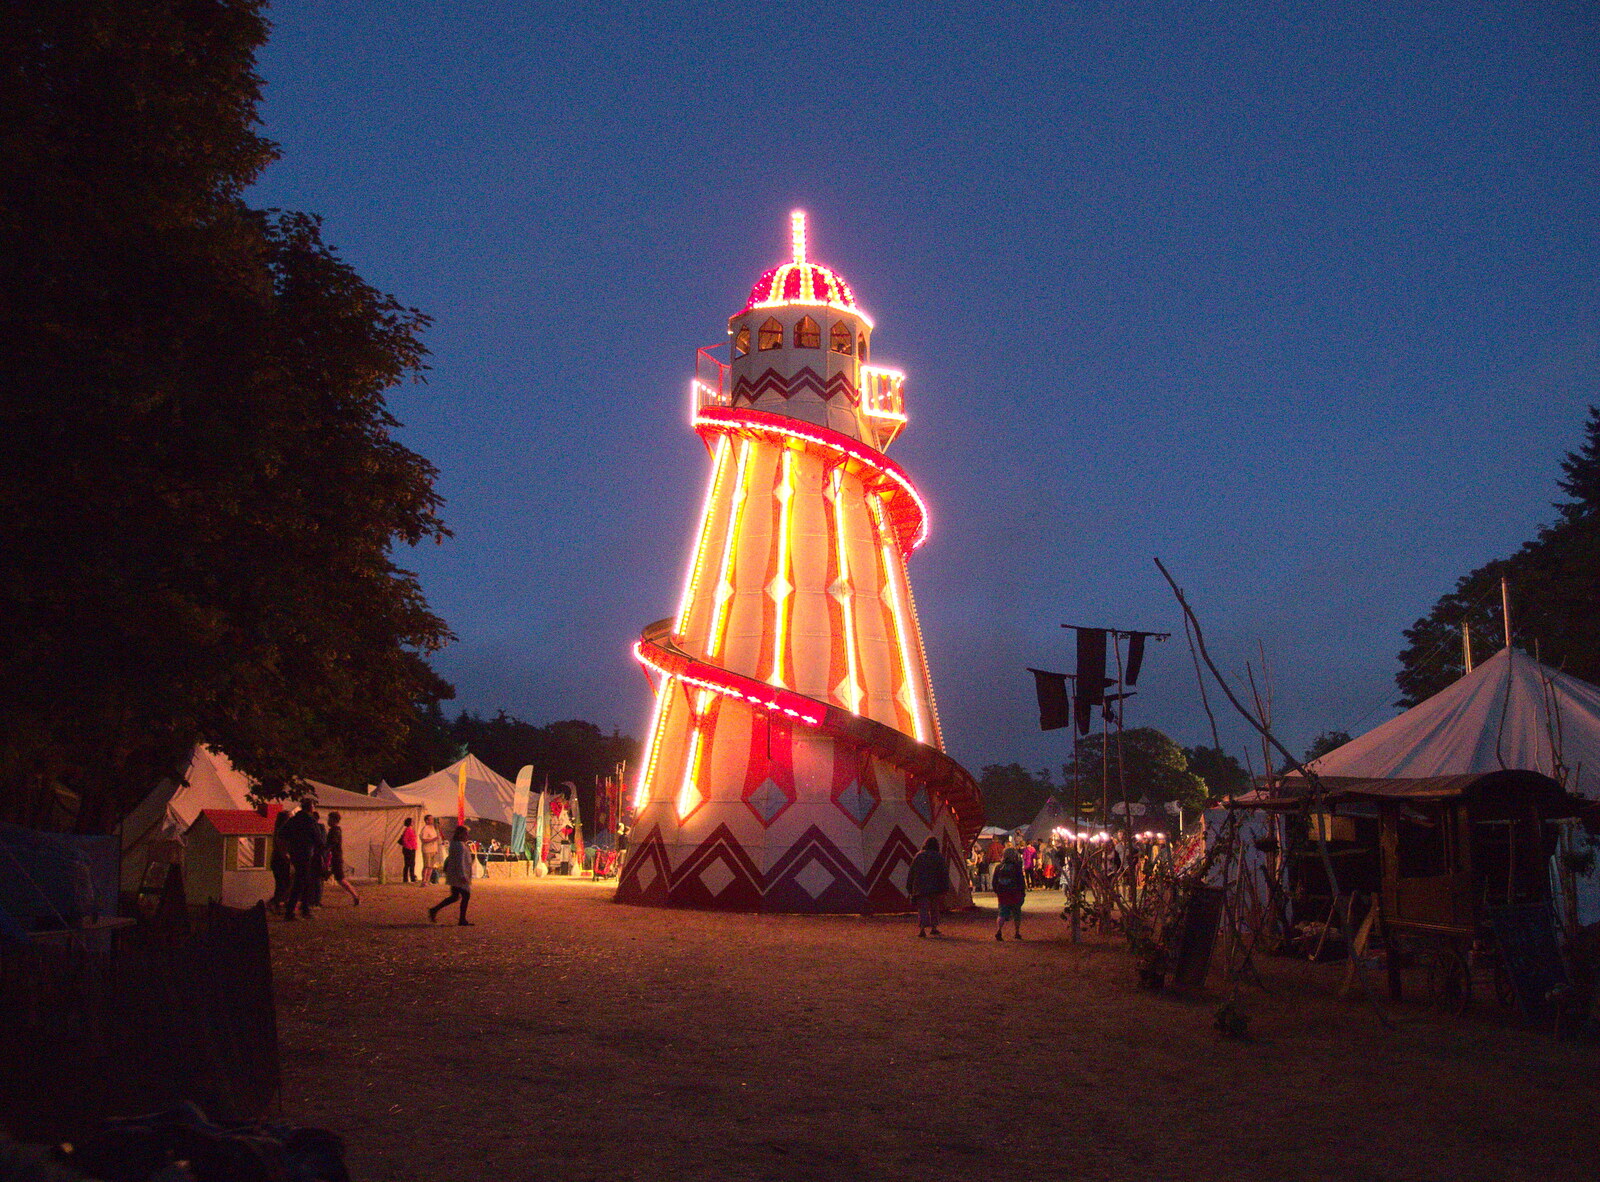 The Helter Skelter at night from The 8th Latitude Festival, Henham Park, Southwold, Suffolk - 18th July 2013